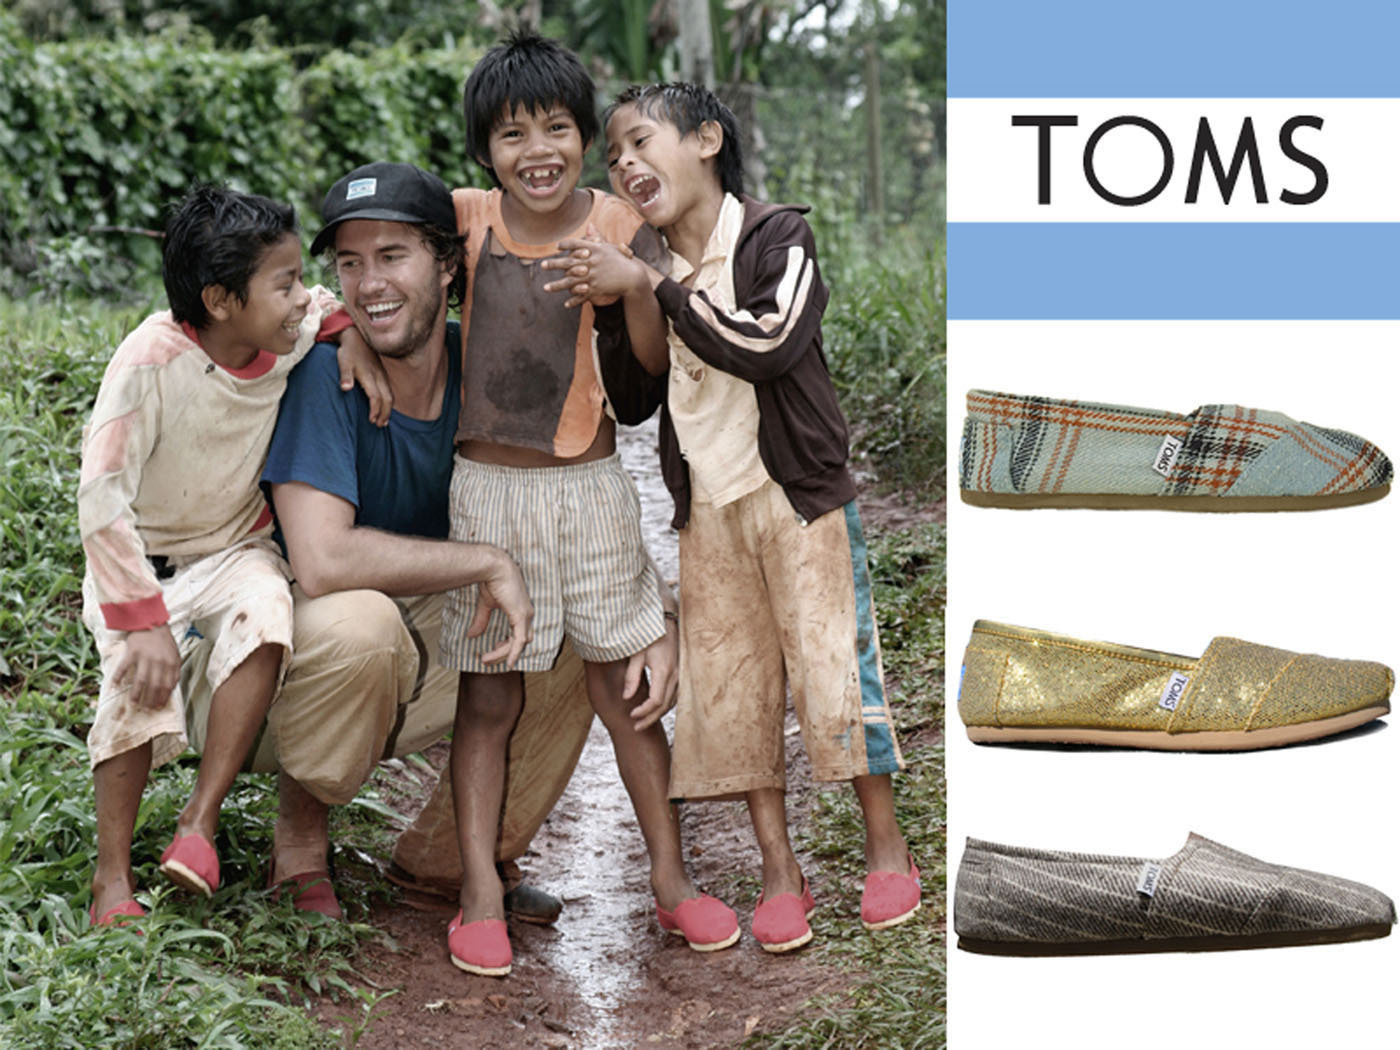 Buy-One, Give-One Model of TOMS Shoes 